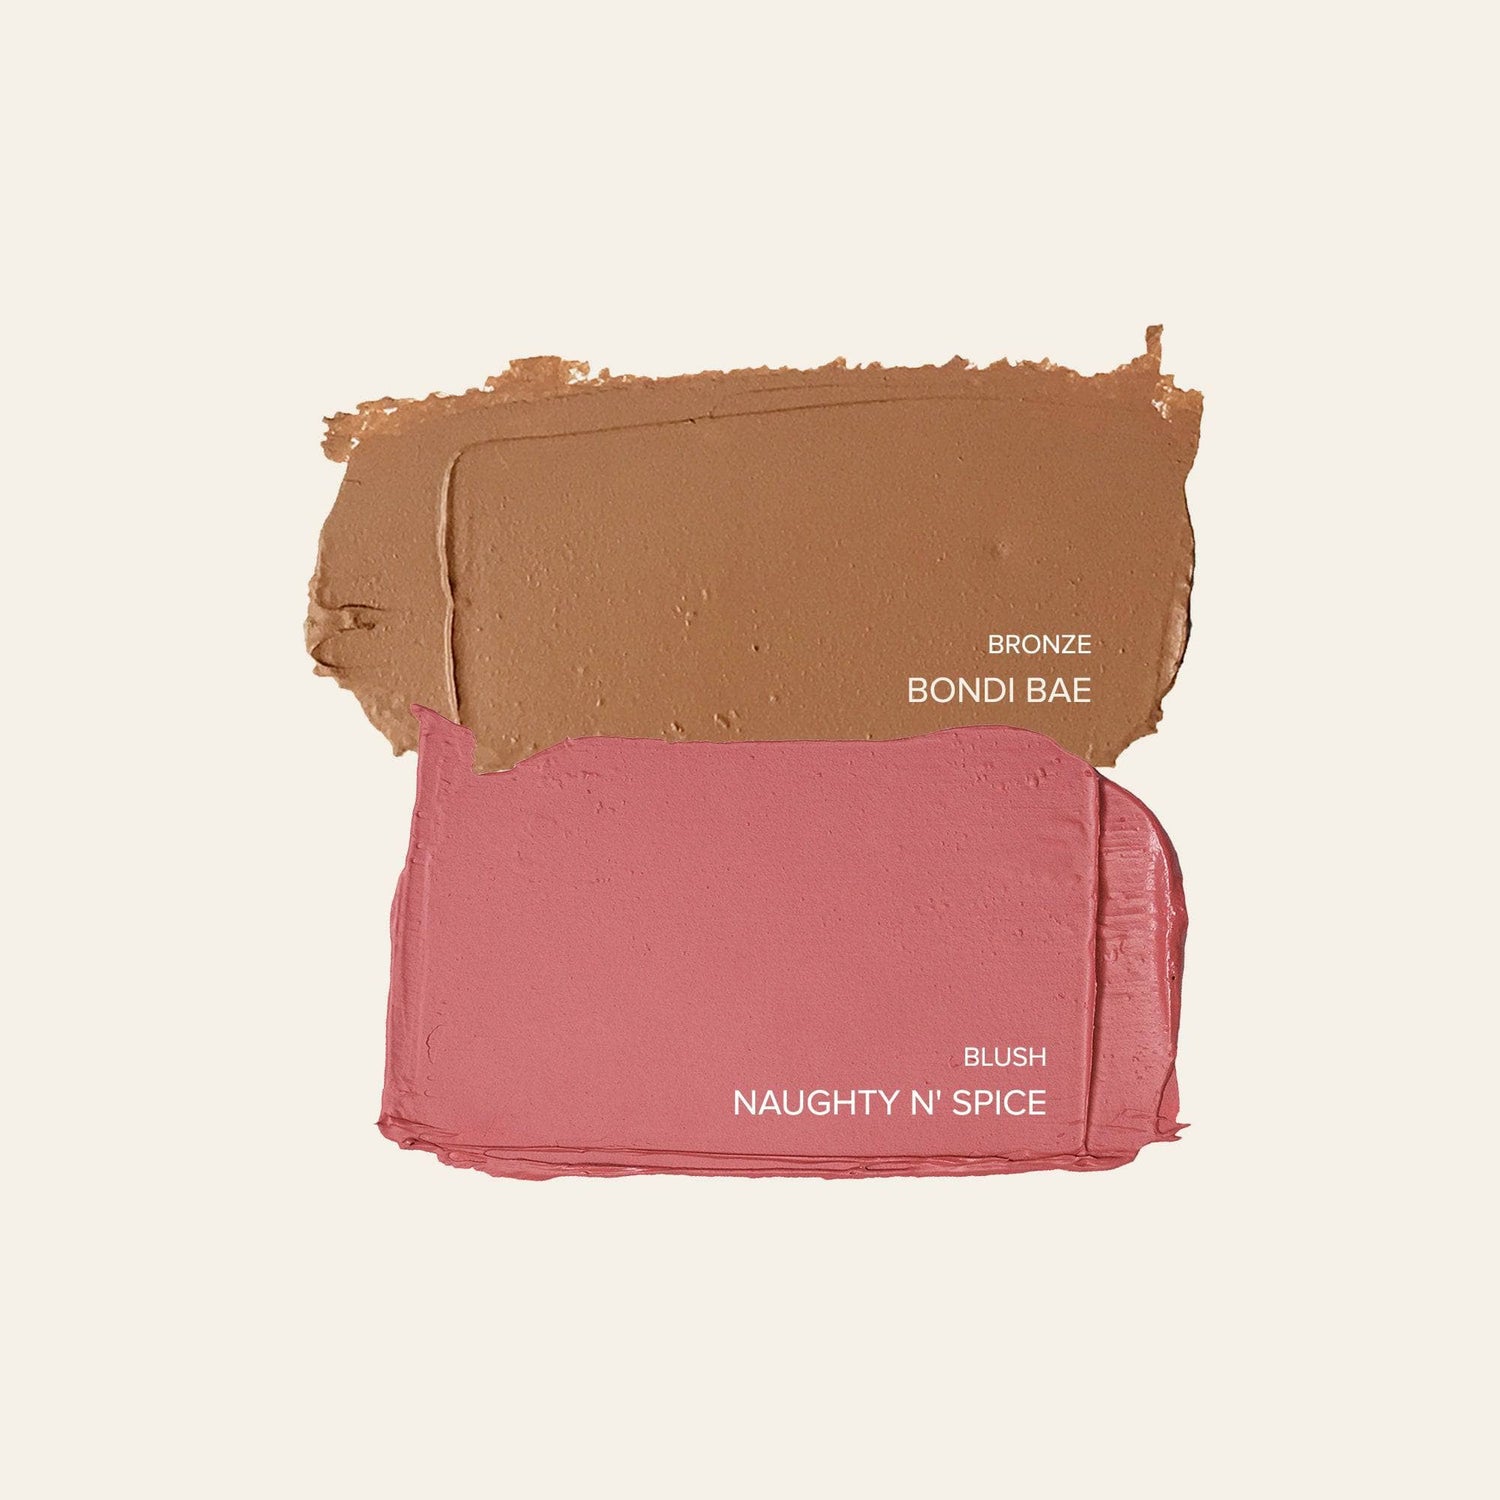 texture swatches of bronzer in shade Bondi Bae and blush in shade Naughty N' Spice